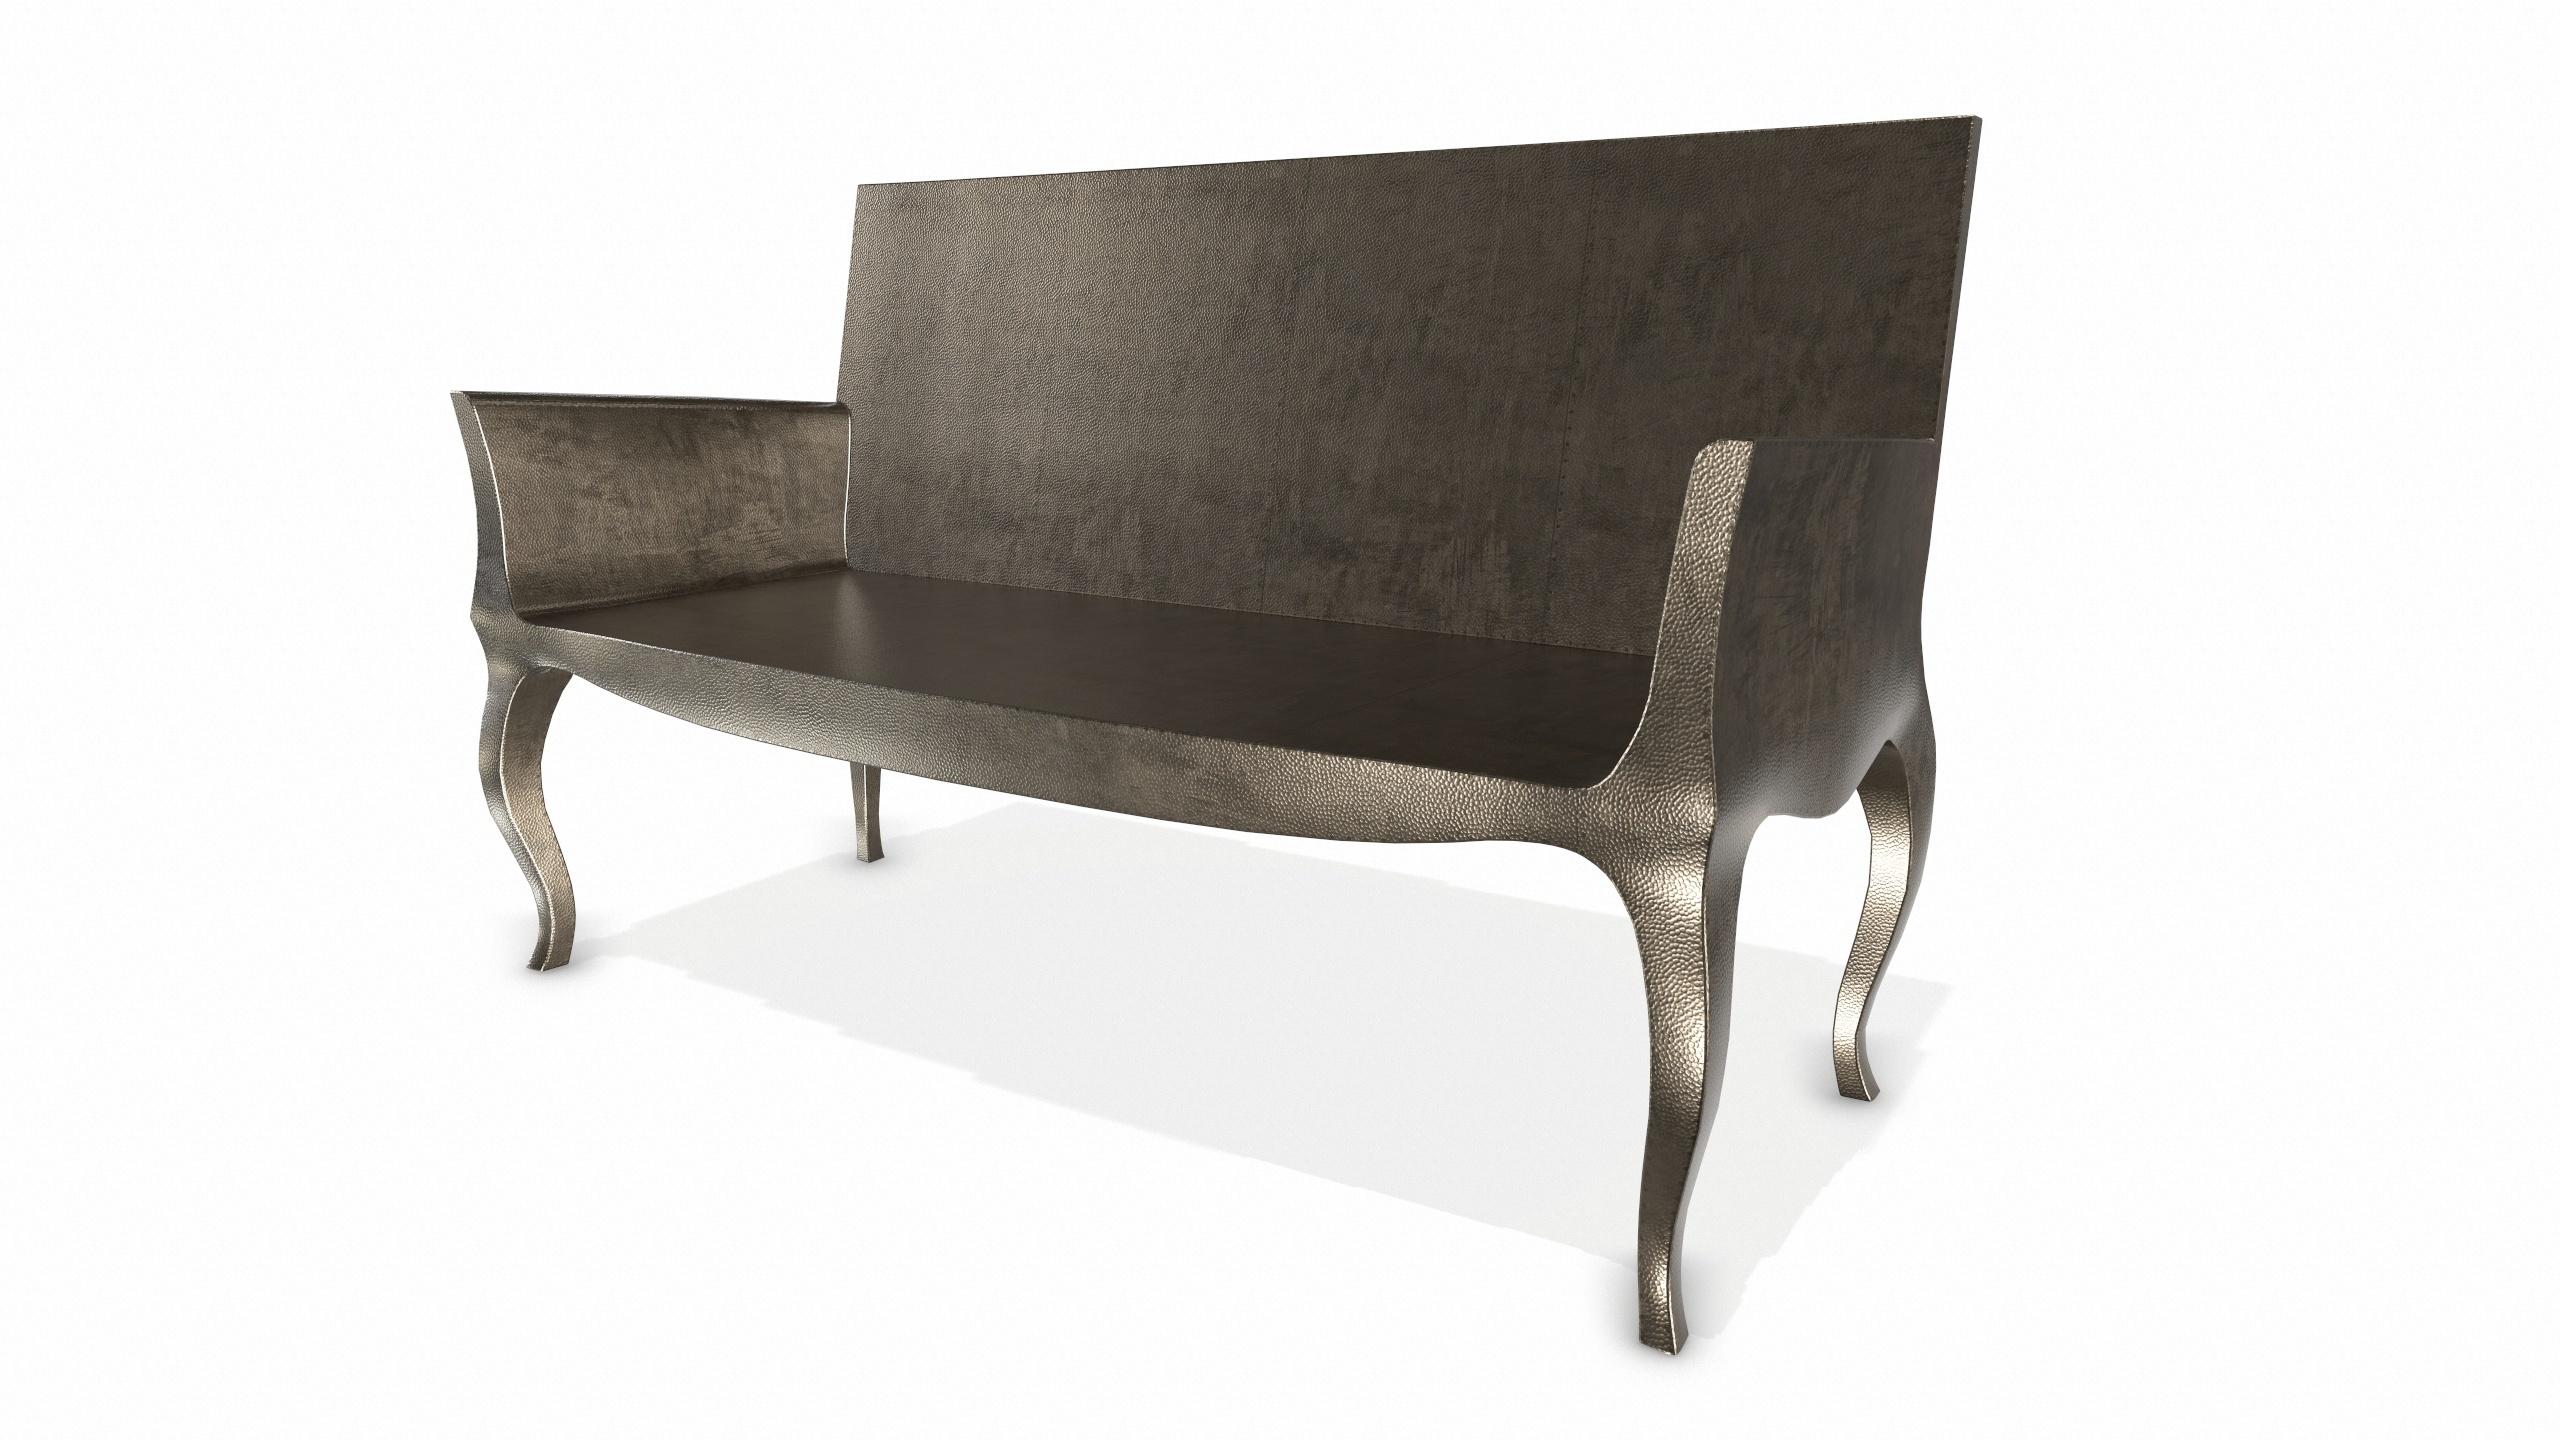 American Louise Settee Art Deco Canapes in Mid. Hammered Antique Bronze by Paul Mathieu For Sale